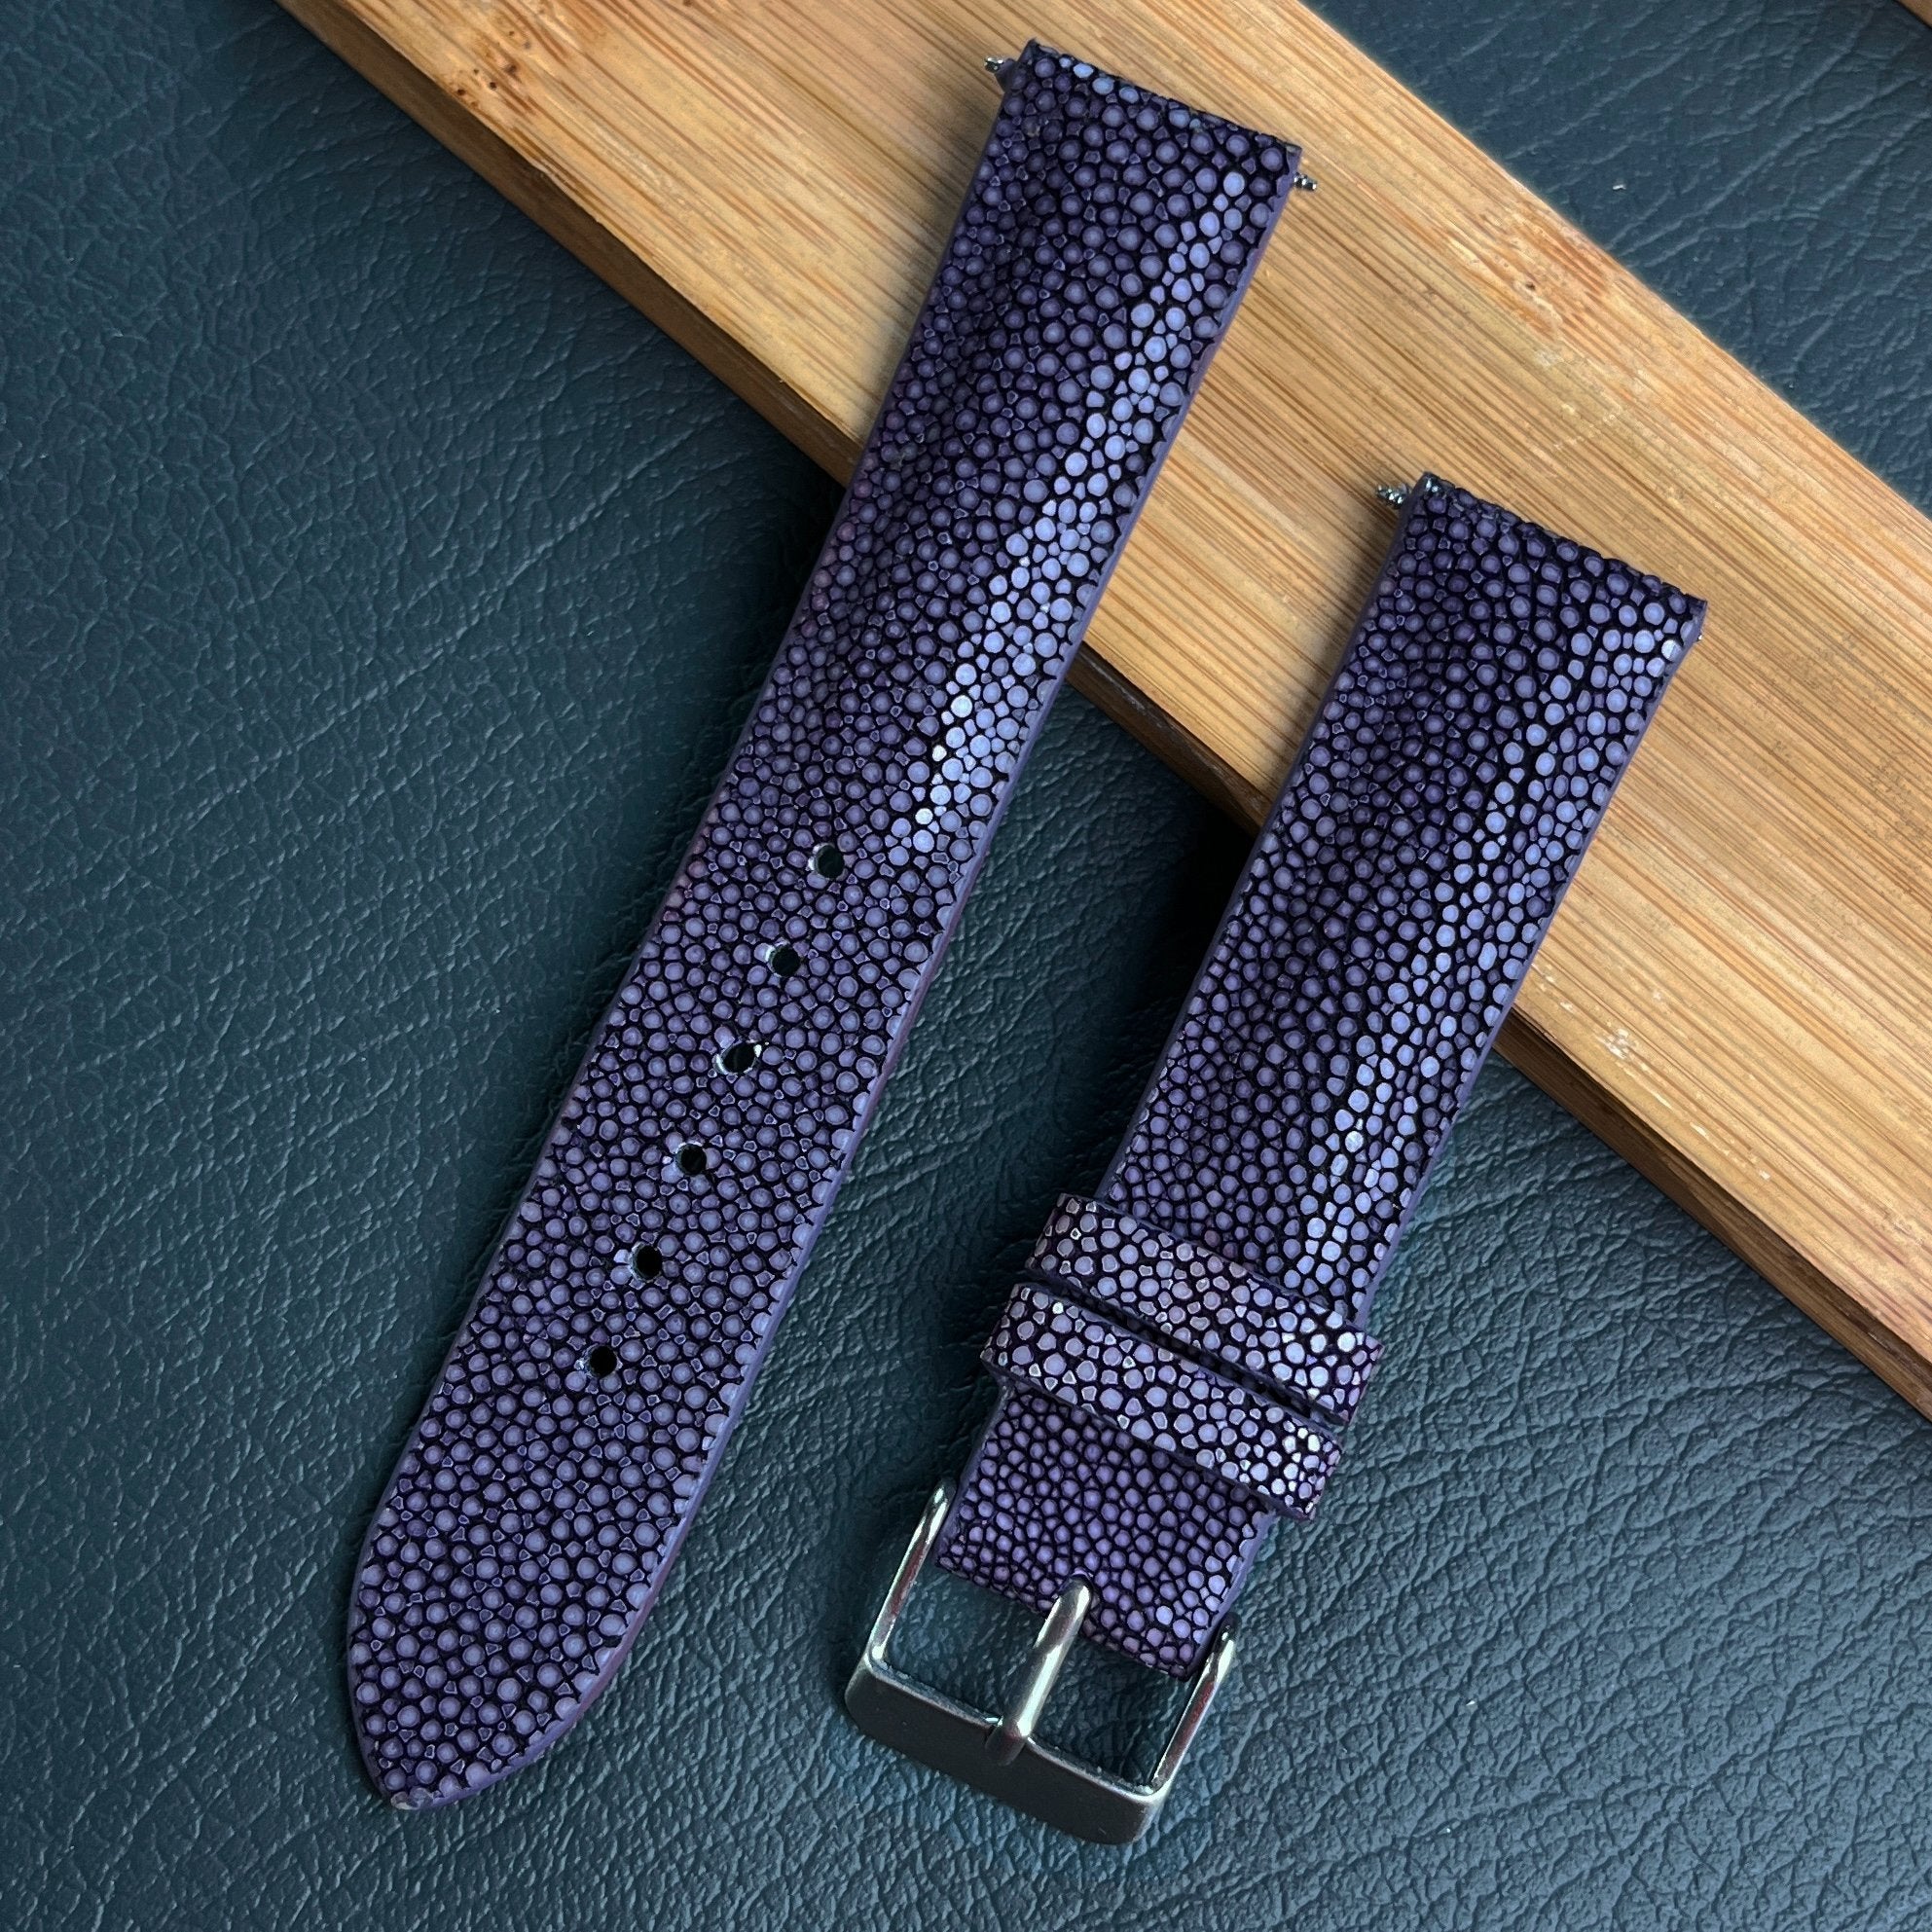 Light purple Stingray Leather Watch Band For Men Replacement Wristwatch Strap - Vinacreations